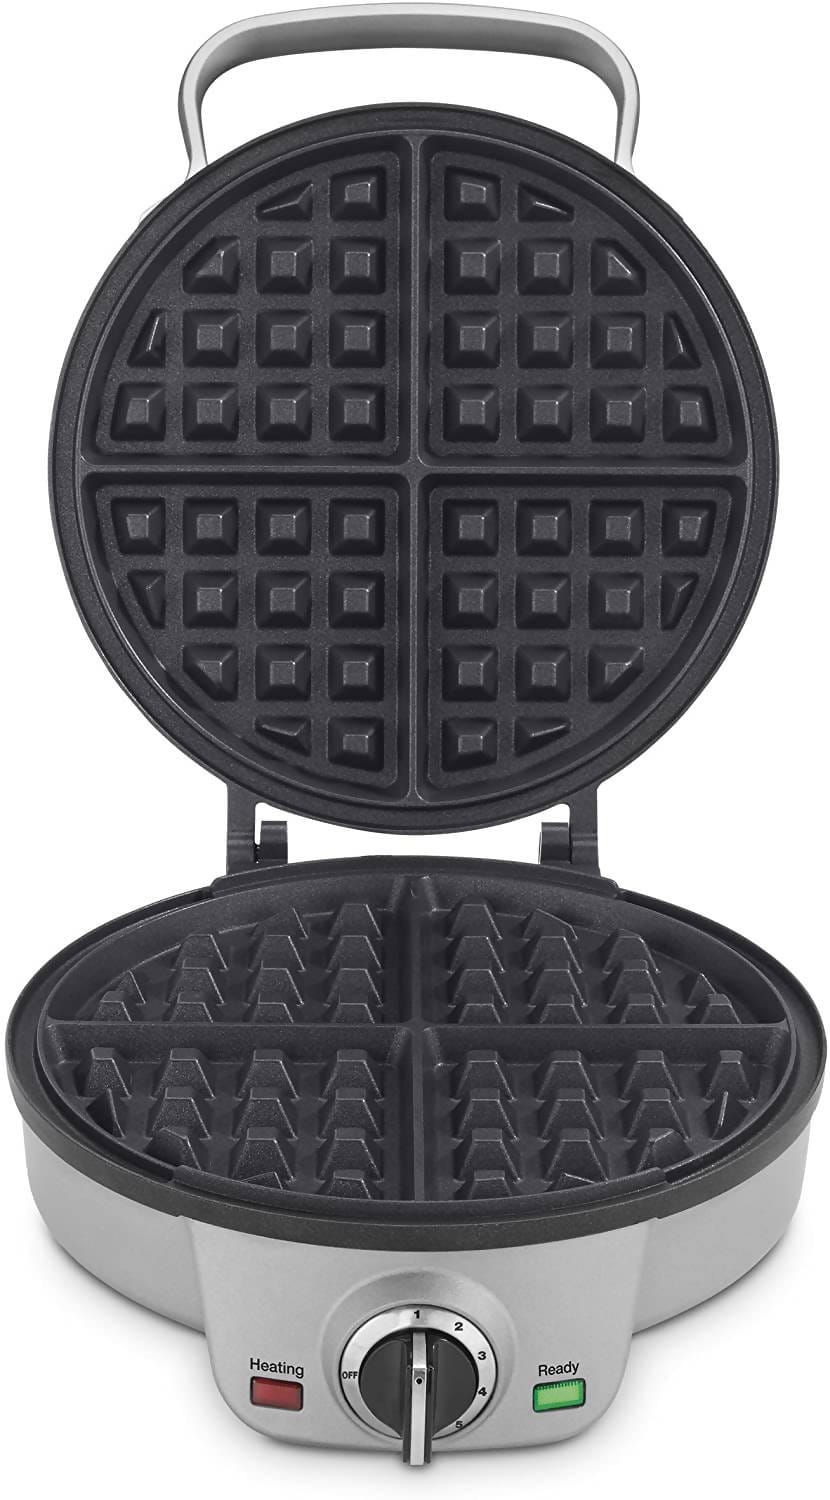 Cuisinart 4-Slice Belgian Waffle Maker cooks golden waffles that are crispy on the outside and mouthwateringly tender on the inside (Silver) CU-WAF-200